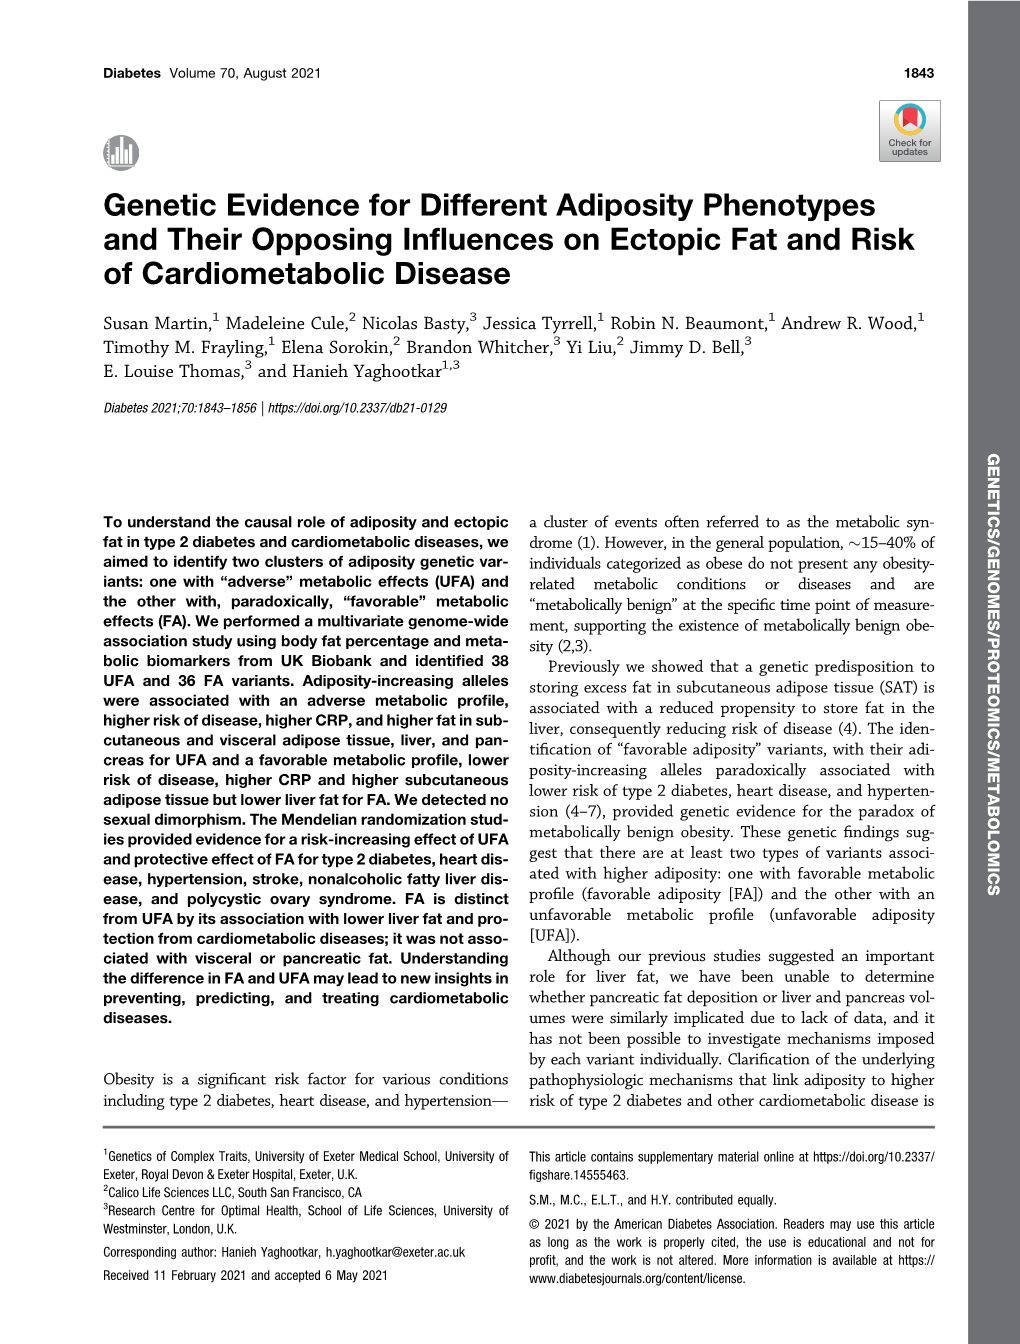 Genetic Evidence for Different Adiposity Phenotypes and Their Opposing Influences on Ectopic Fat and Risk of Cardiometabolic Disease